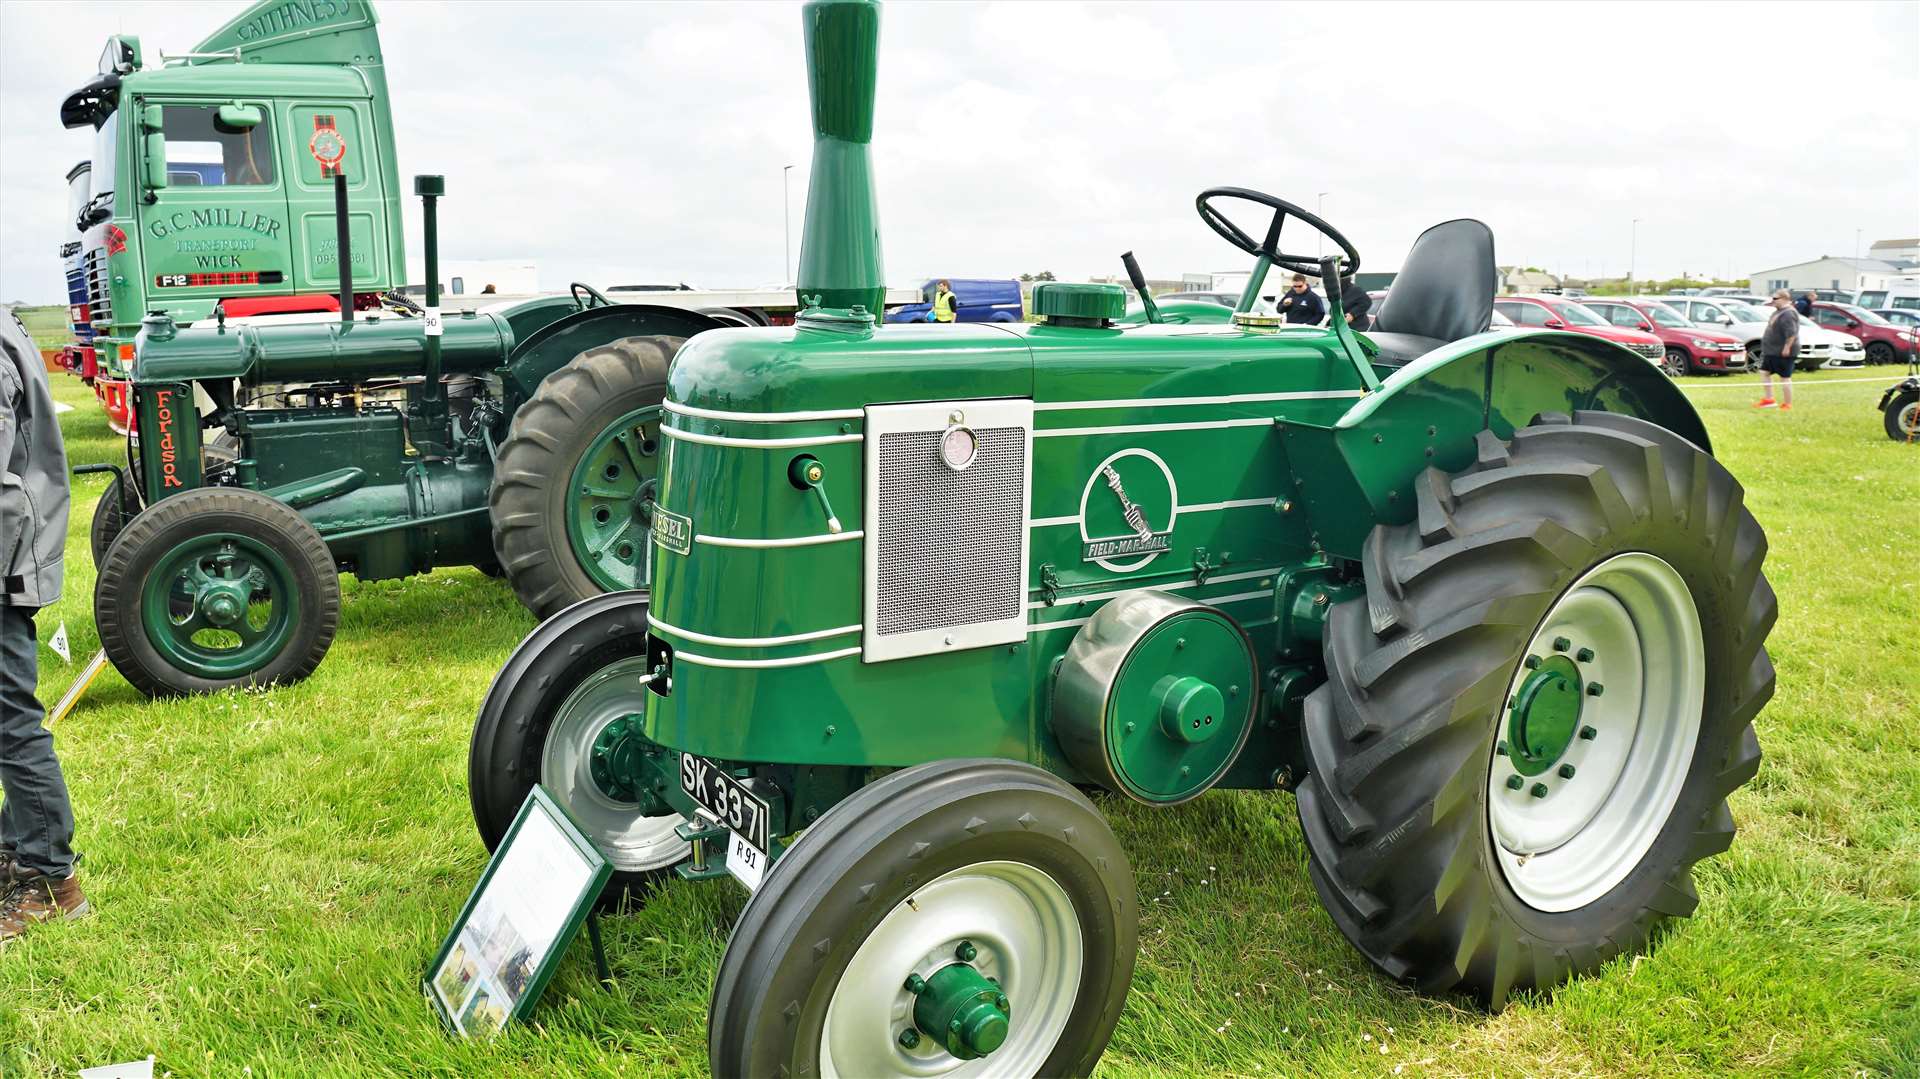 A beautifully restored 1948 Field Marshall Series 2 Tractor owned by Nicol Mackenzie, Halkirk. It came first in its farm vehicle class. Picture: DGS